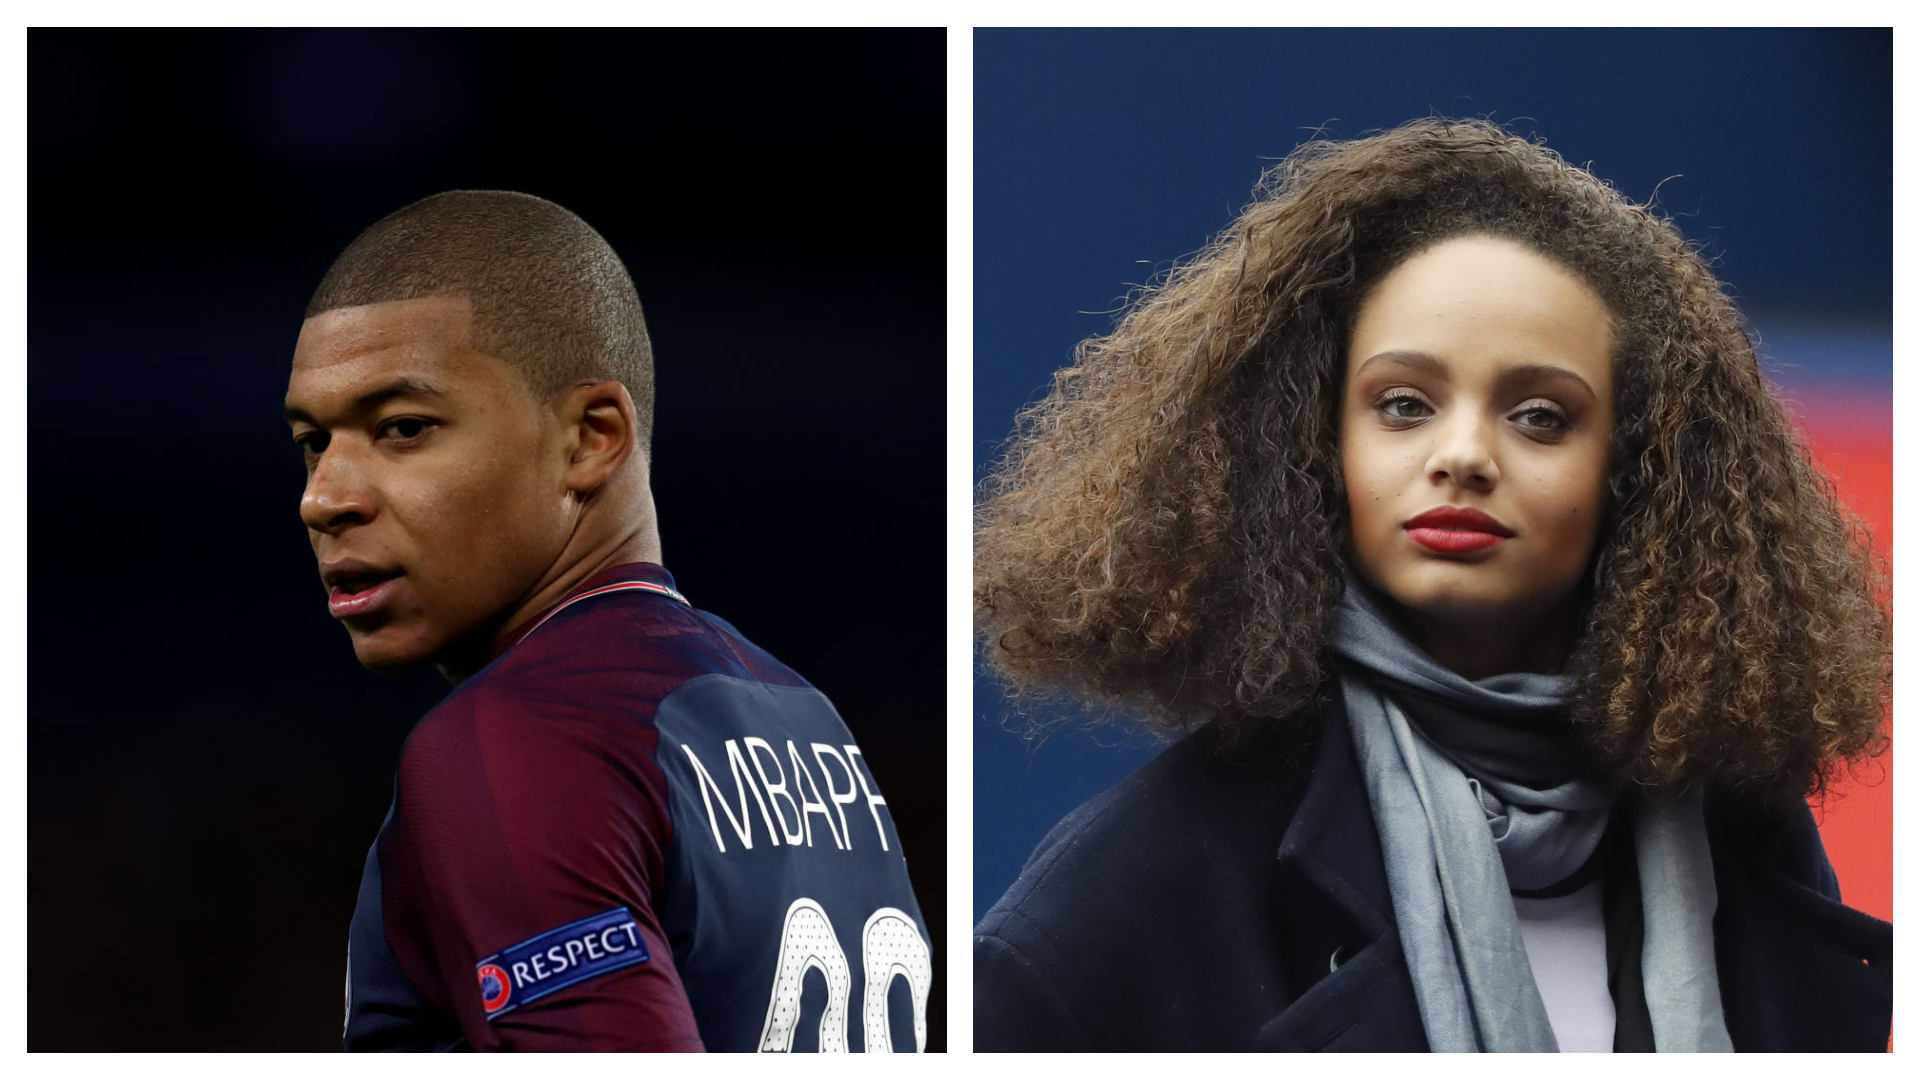 Alicia aylies and mbappe together